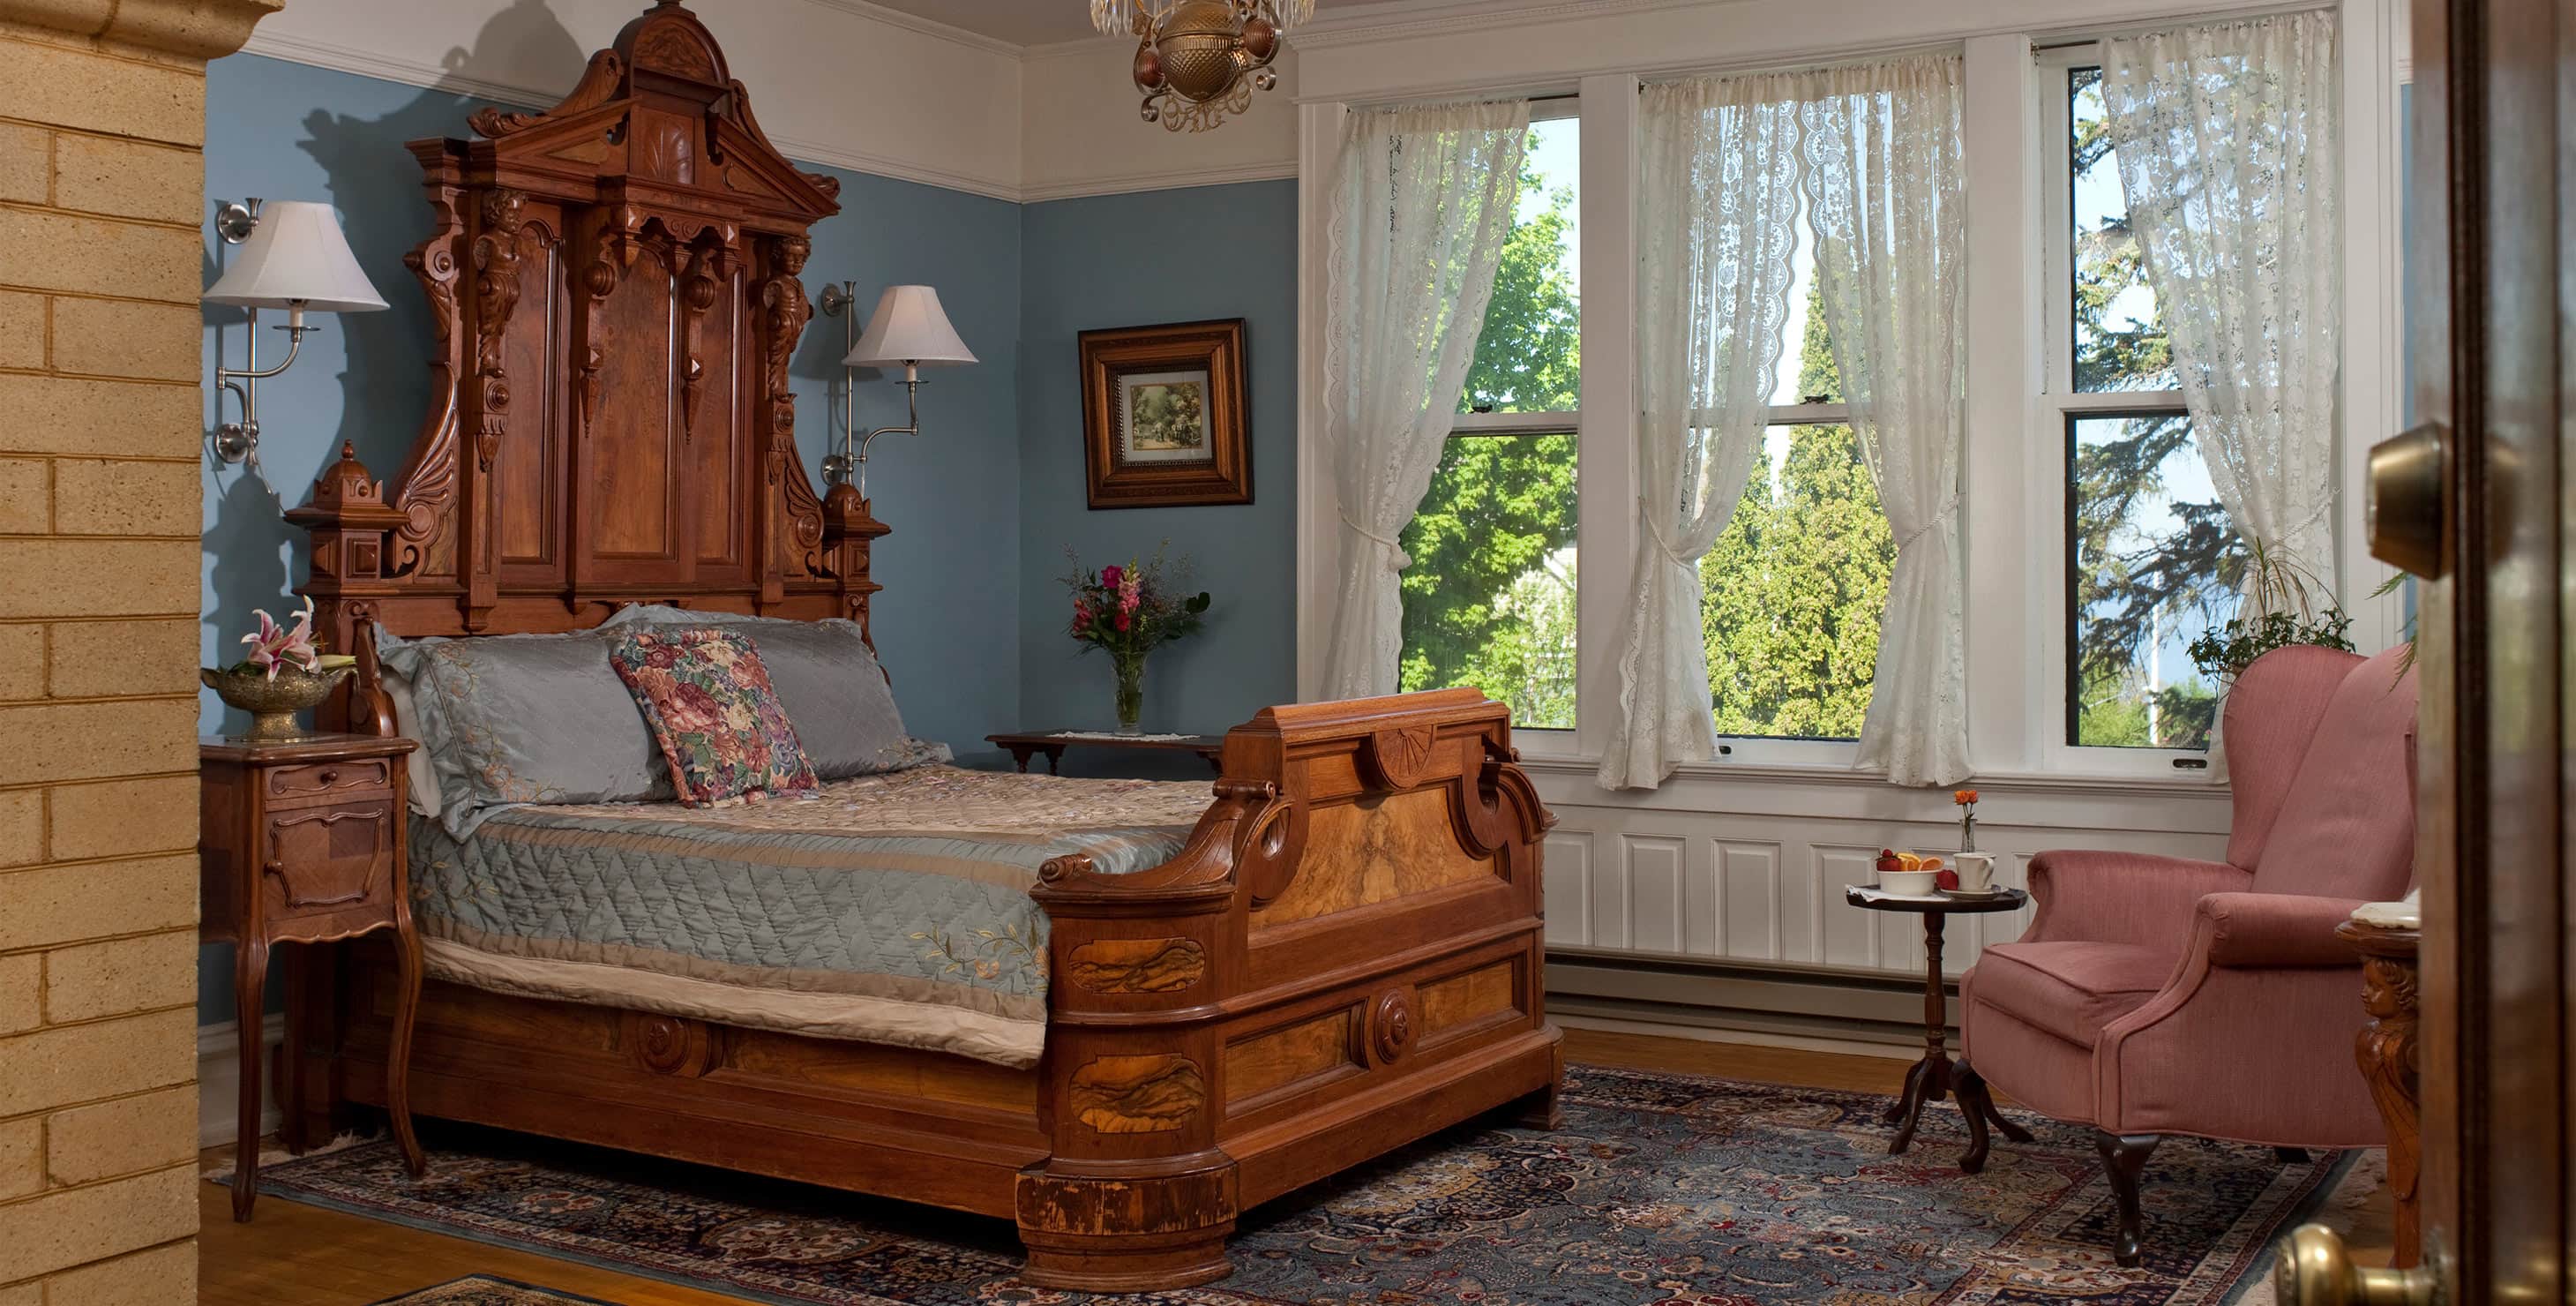 Ornate wood bed with side table, pink chair, and three windows